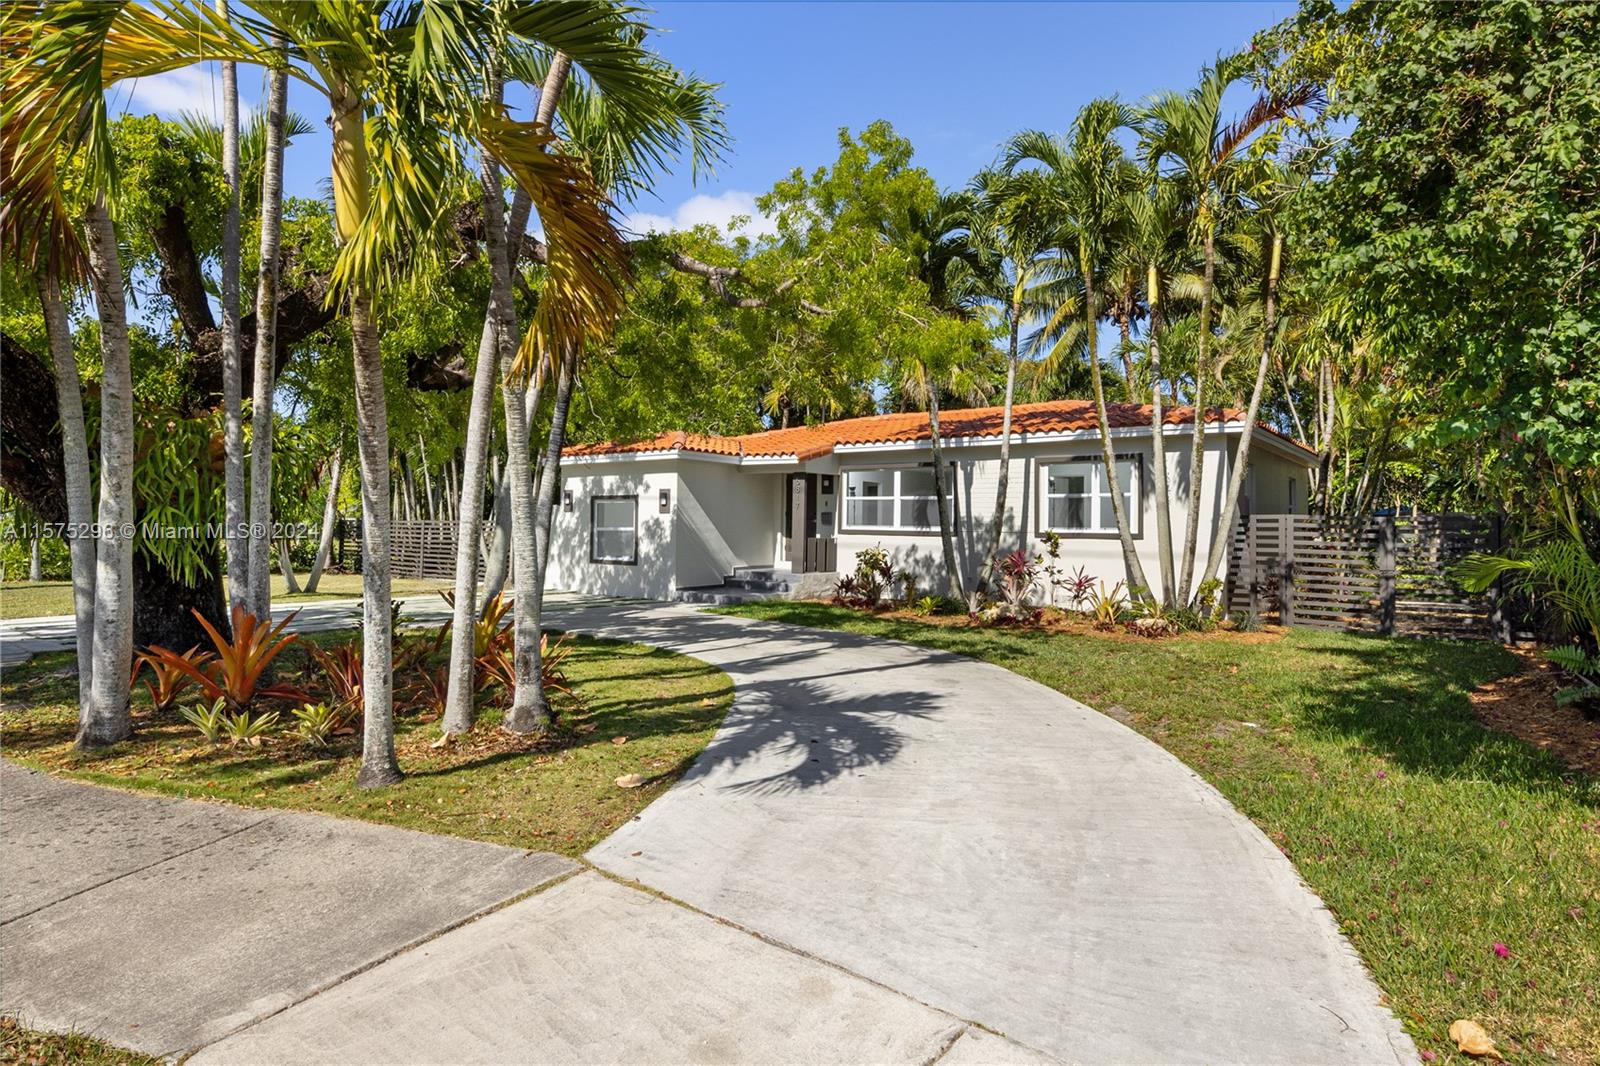 Newly remodeled 4B/3Ba home in the heart of South Miami. Filled with natural light, ample living/family area, combination living / dining area. Split plan for privacy, comfortable bedrooms with re-designed closets to maximize use of space. Completely renovated bathrooms in sleek modern design. Beautiful new laminate floors. High efficiency LED light throughout the home. NEW washer, dryer and water heater. This charming home sits on a lush 10,220 sqft lot filled with shade-giving trees and a delightful garden. Ample exterior storage space. Newly restructured foundations and inspected roof. Quiet area of South Miami.